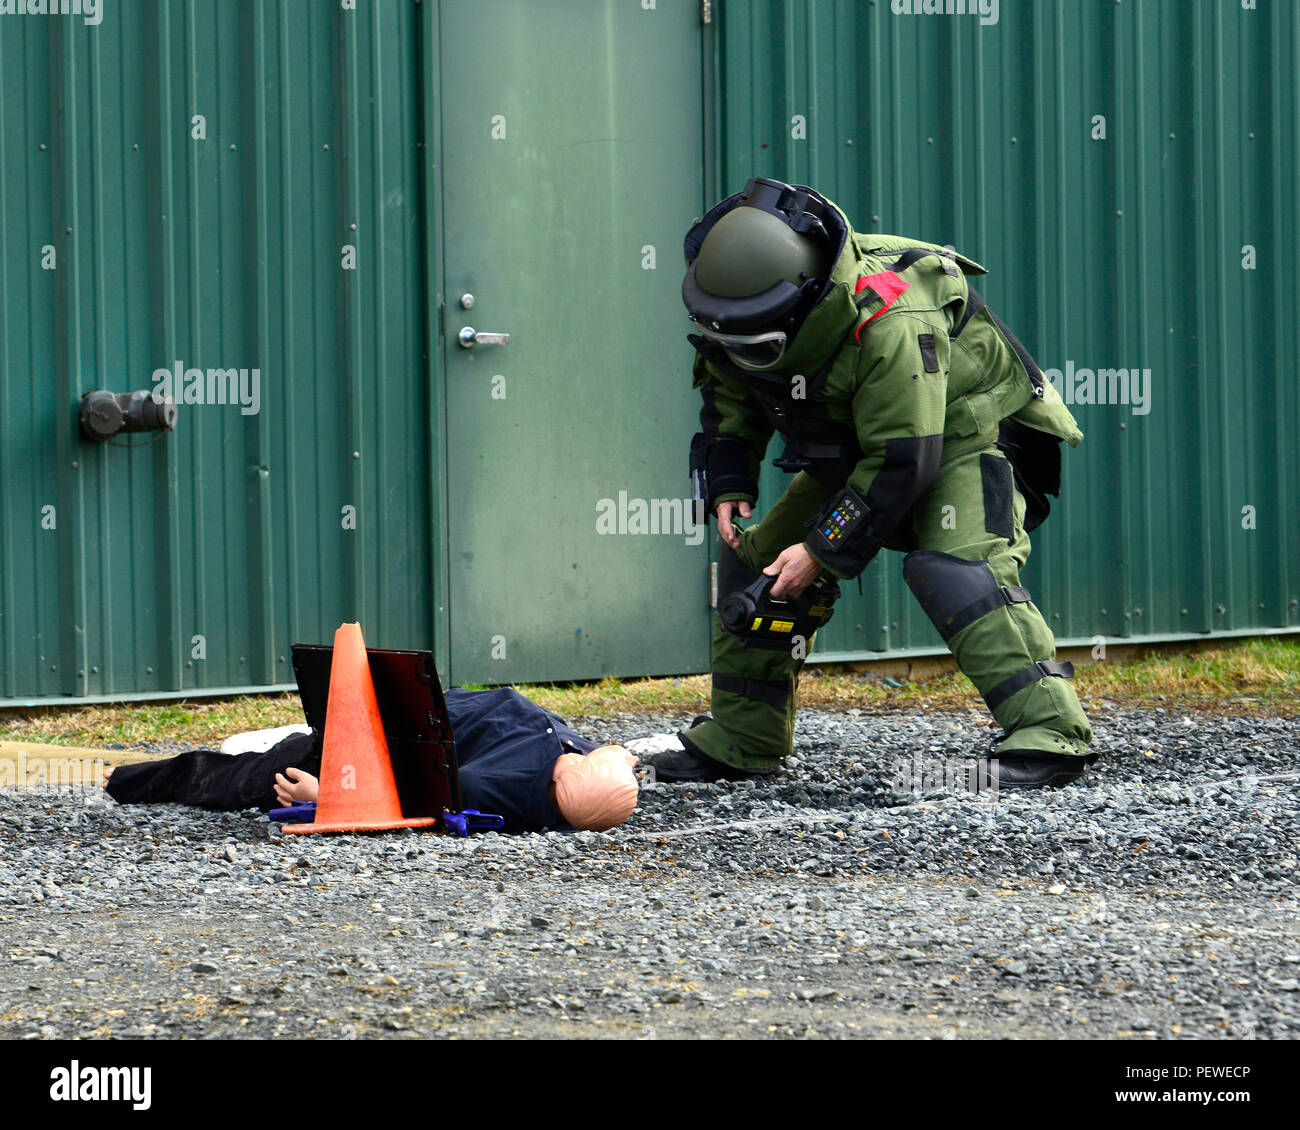 160205-N-ZA795-072 WASHINGTON (Feb. 5, 2016) -- A member of the City of Annapolis Bomb Squad takes and x-ray image of a simulated neutralized active shooter/suicide bomber during an drill as part of the annual exercise Solid Curtain-Citadel Shield 2016. Solid Curtain-Citadel Shield is an annual exercise that assesses the readiness of Navy security personnel to respond to threats located on naval installations and individual units. (U.S. Navy photo by Mass Communication Specialist 1st Class Pedro A. Rodriguez/Released) Stock Photo